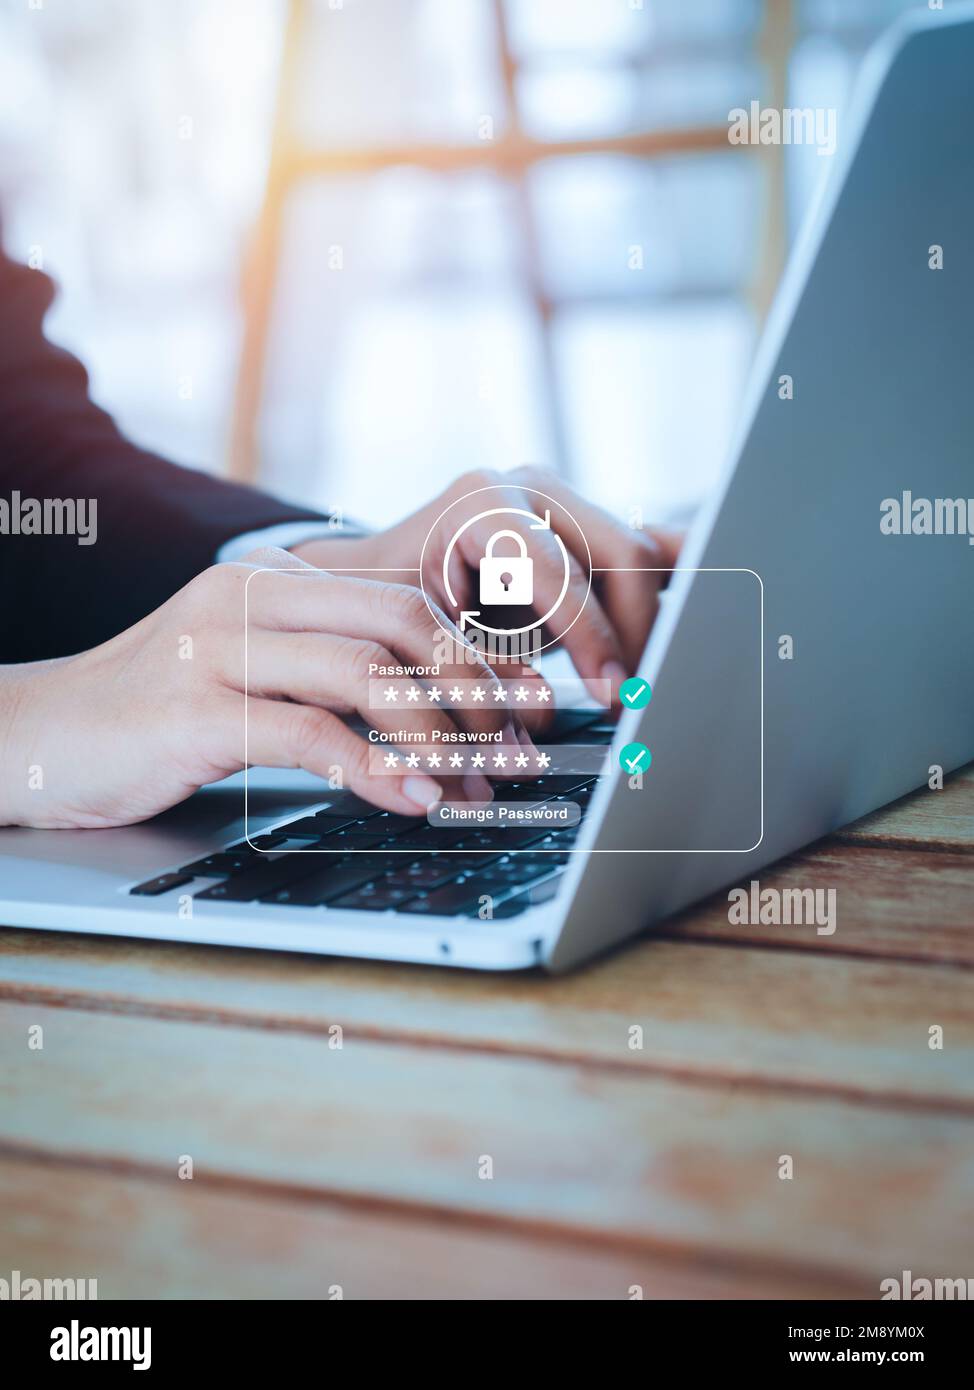 Reset password concept. Lock icon, security code showing on change password page while business person using laptop computer, vertical style. Cyber se Stock Photo